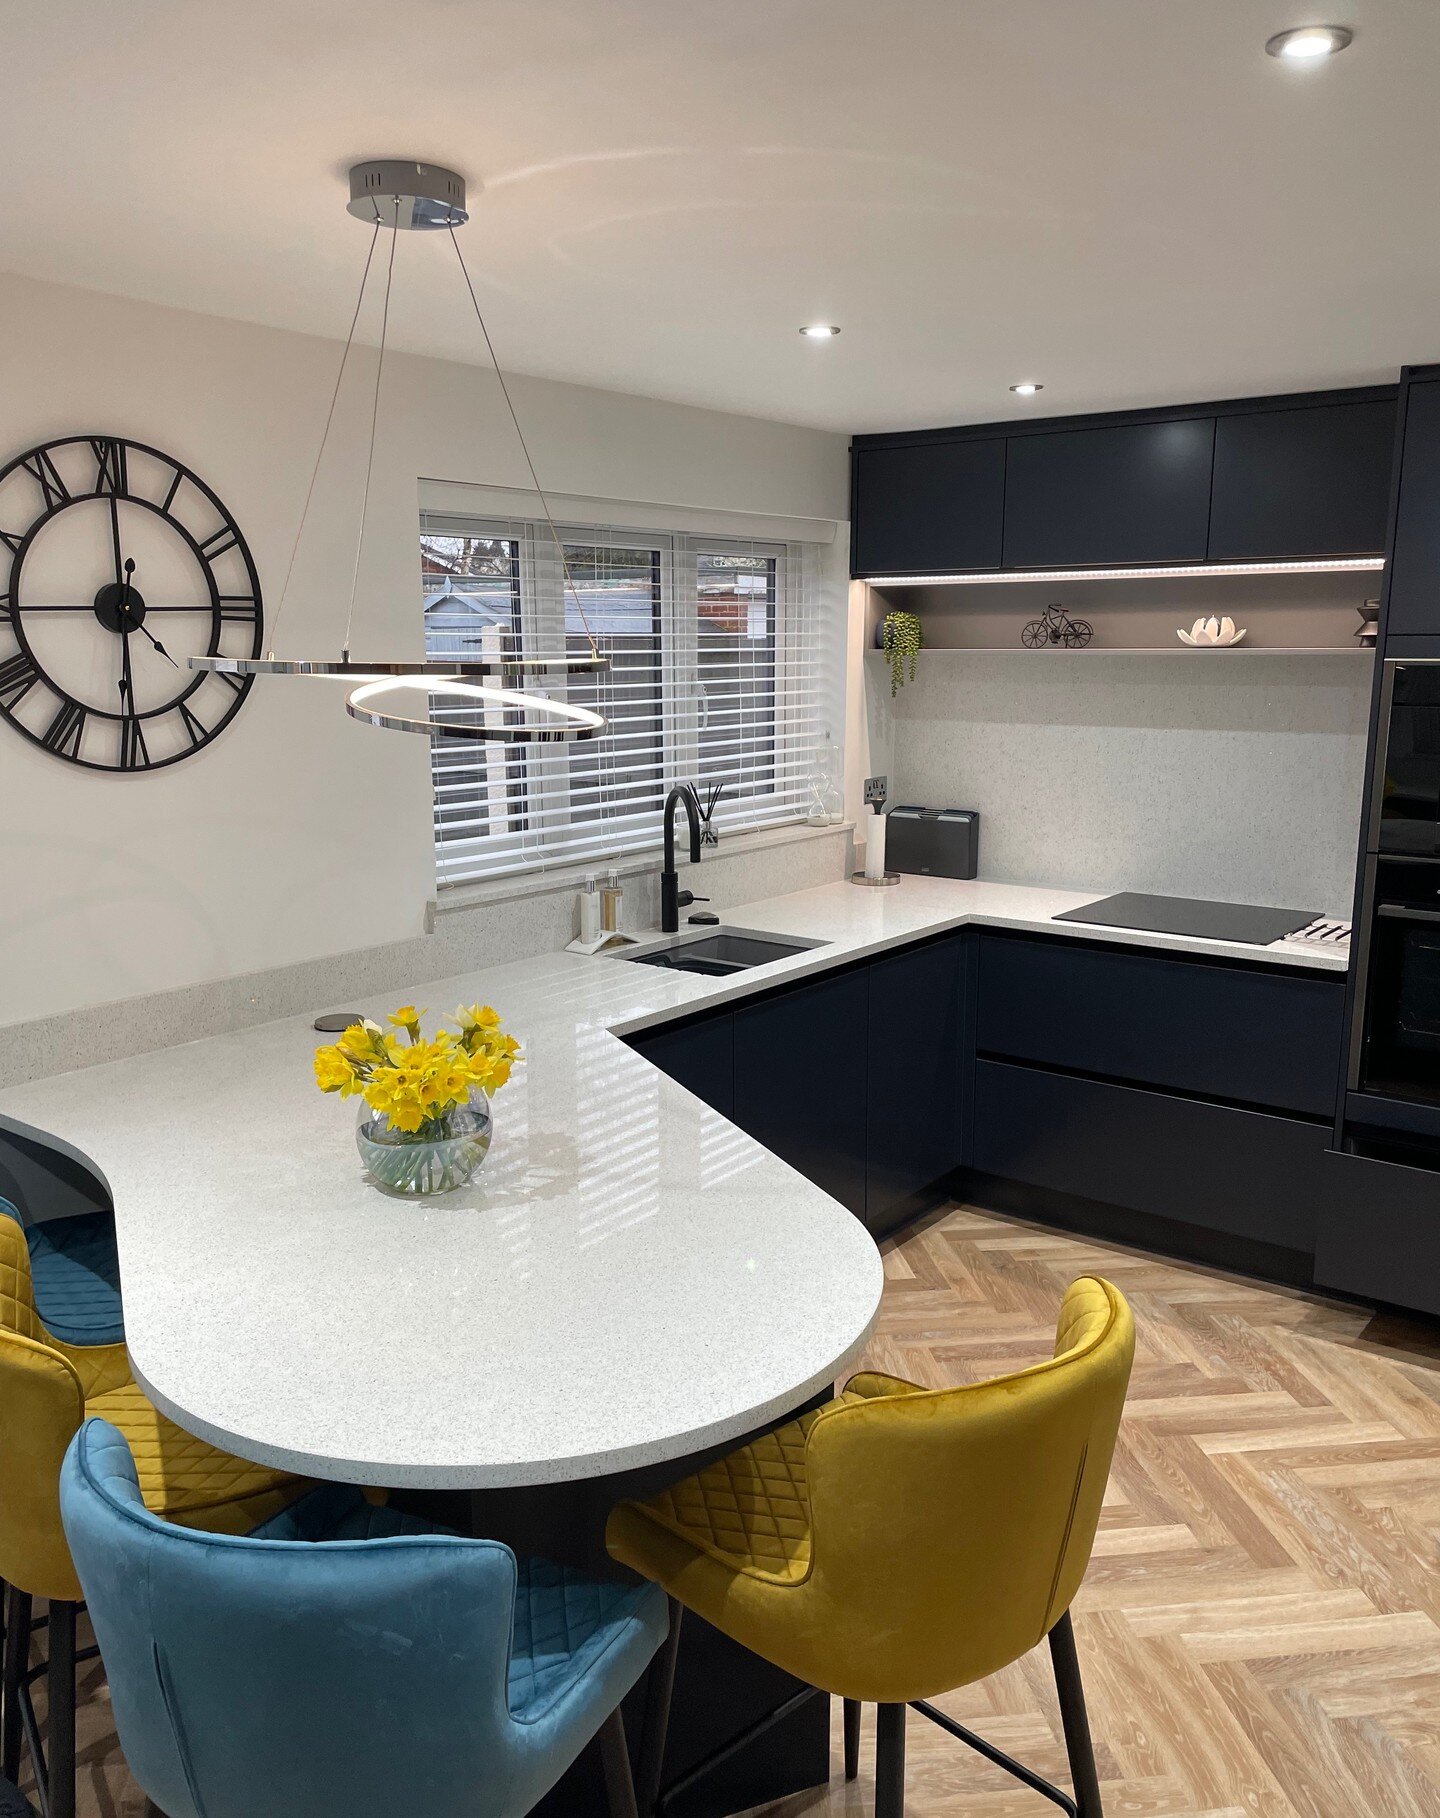 Stunning Linear kitchen in Indigo just completed. This kitchen also features a Black @quookeruk Flex tap, @neffhomeuk Collection Appliances in Graphite and Pale Limed Oak @karndean_uk herringbone Flooring. Get in touch with us to see how we could tra